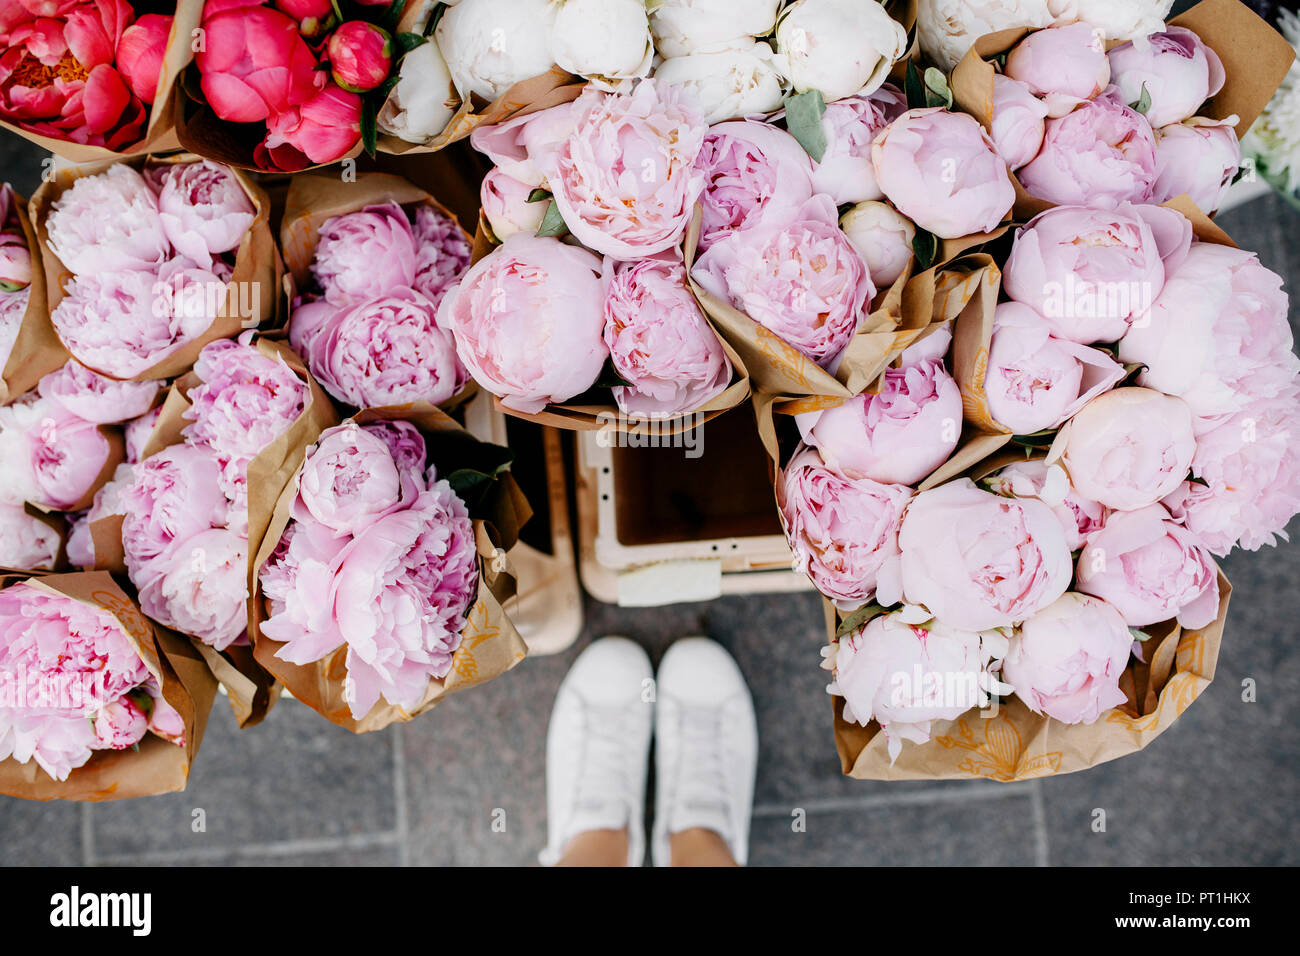 Bunches of peonies at flower market Stock Photo